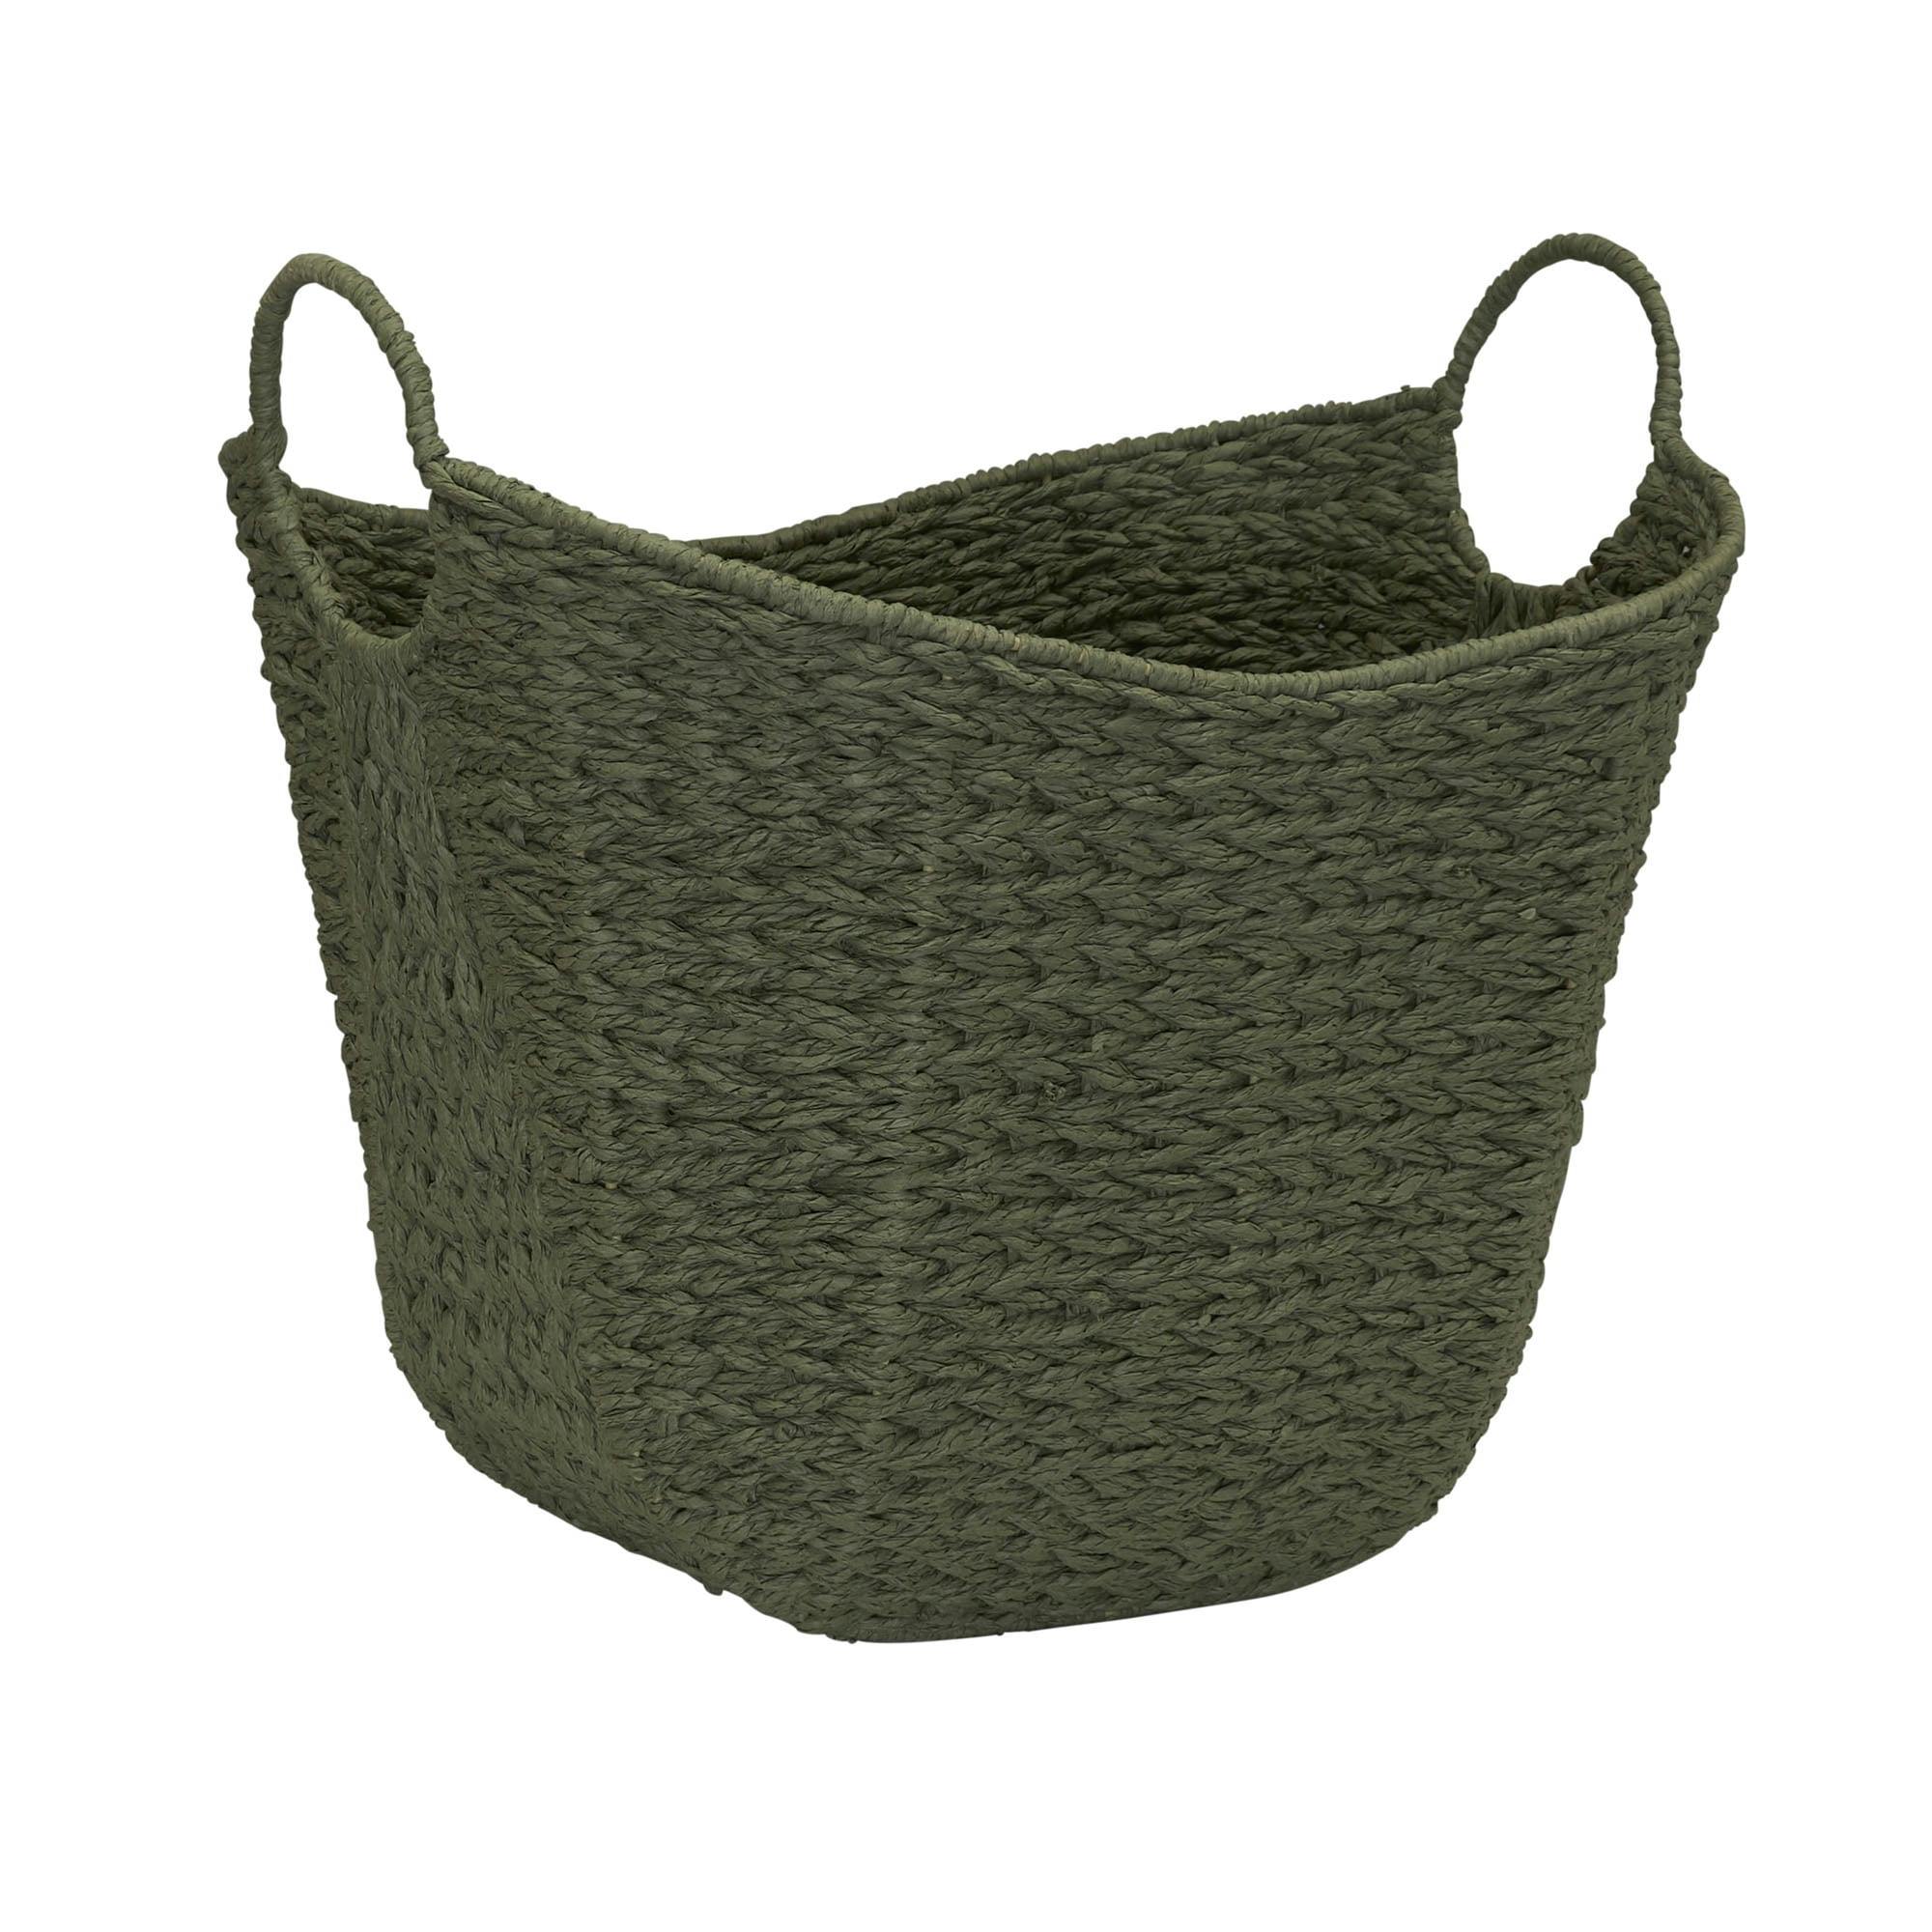 Olive Green Seagrass Oval Storage Basket with Wire Handles